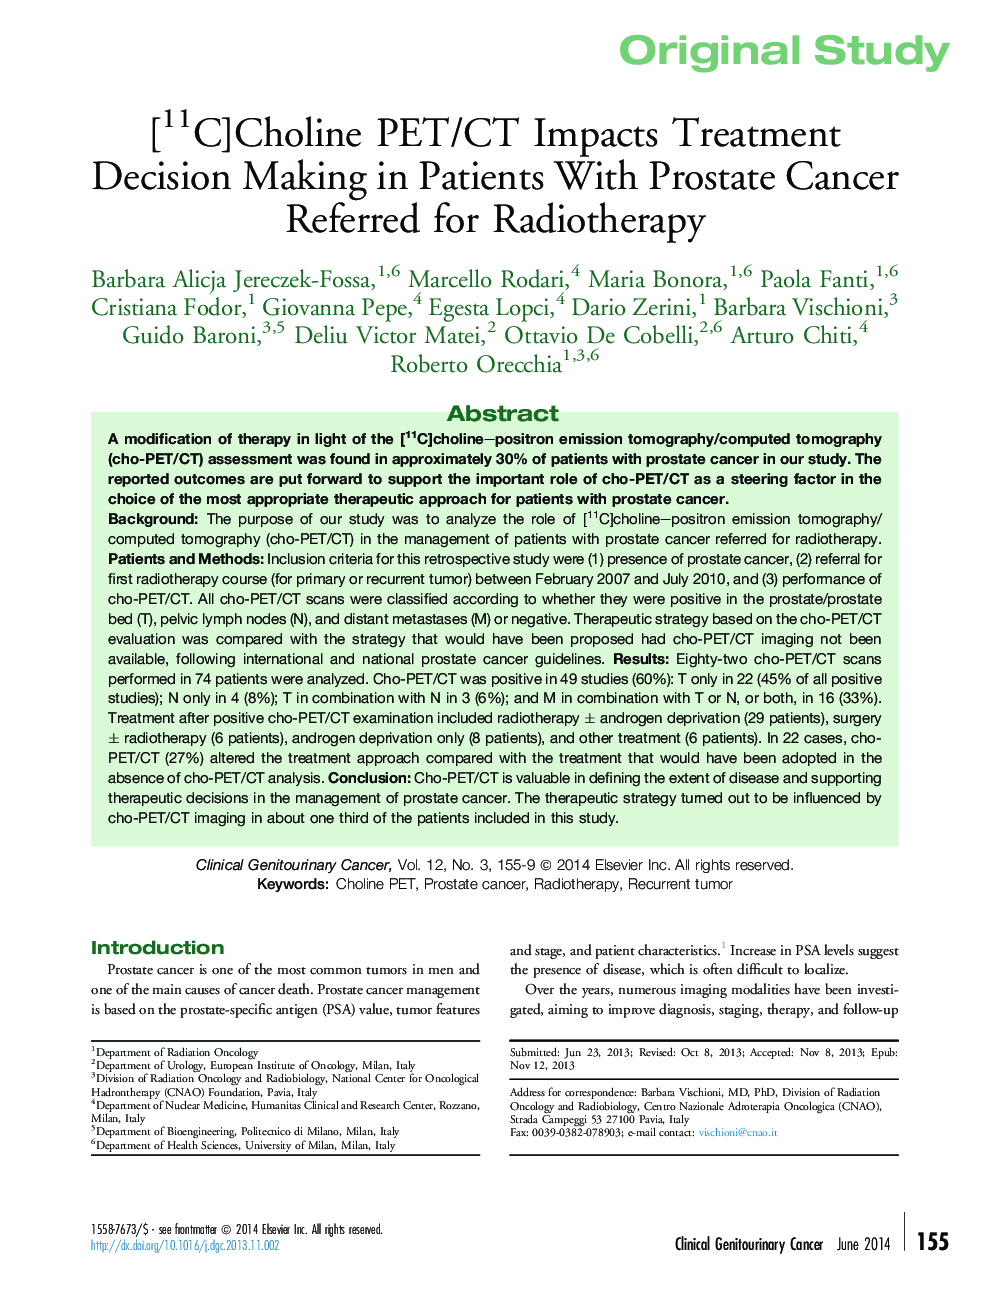 [11C]Choline PET/CT Impacts Treatment Decision Making in Patients With Prostate Cancer Referred for Radiotherapy